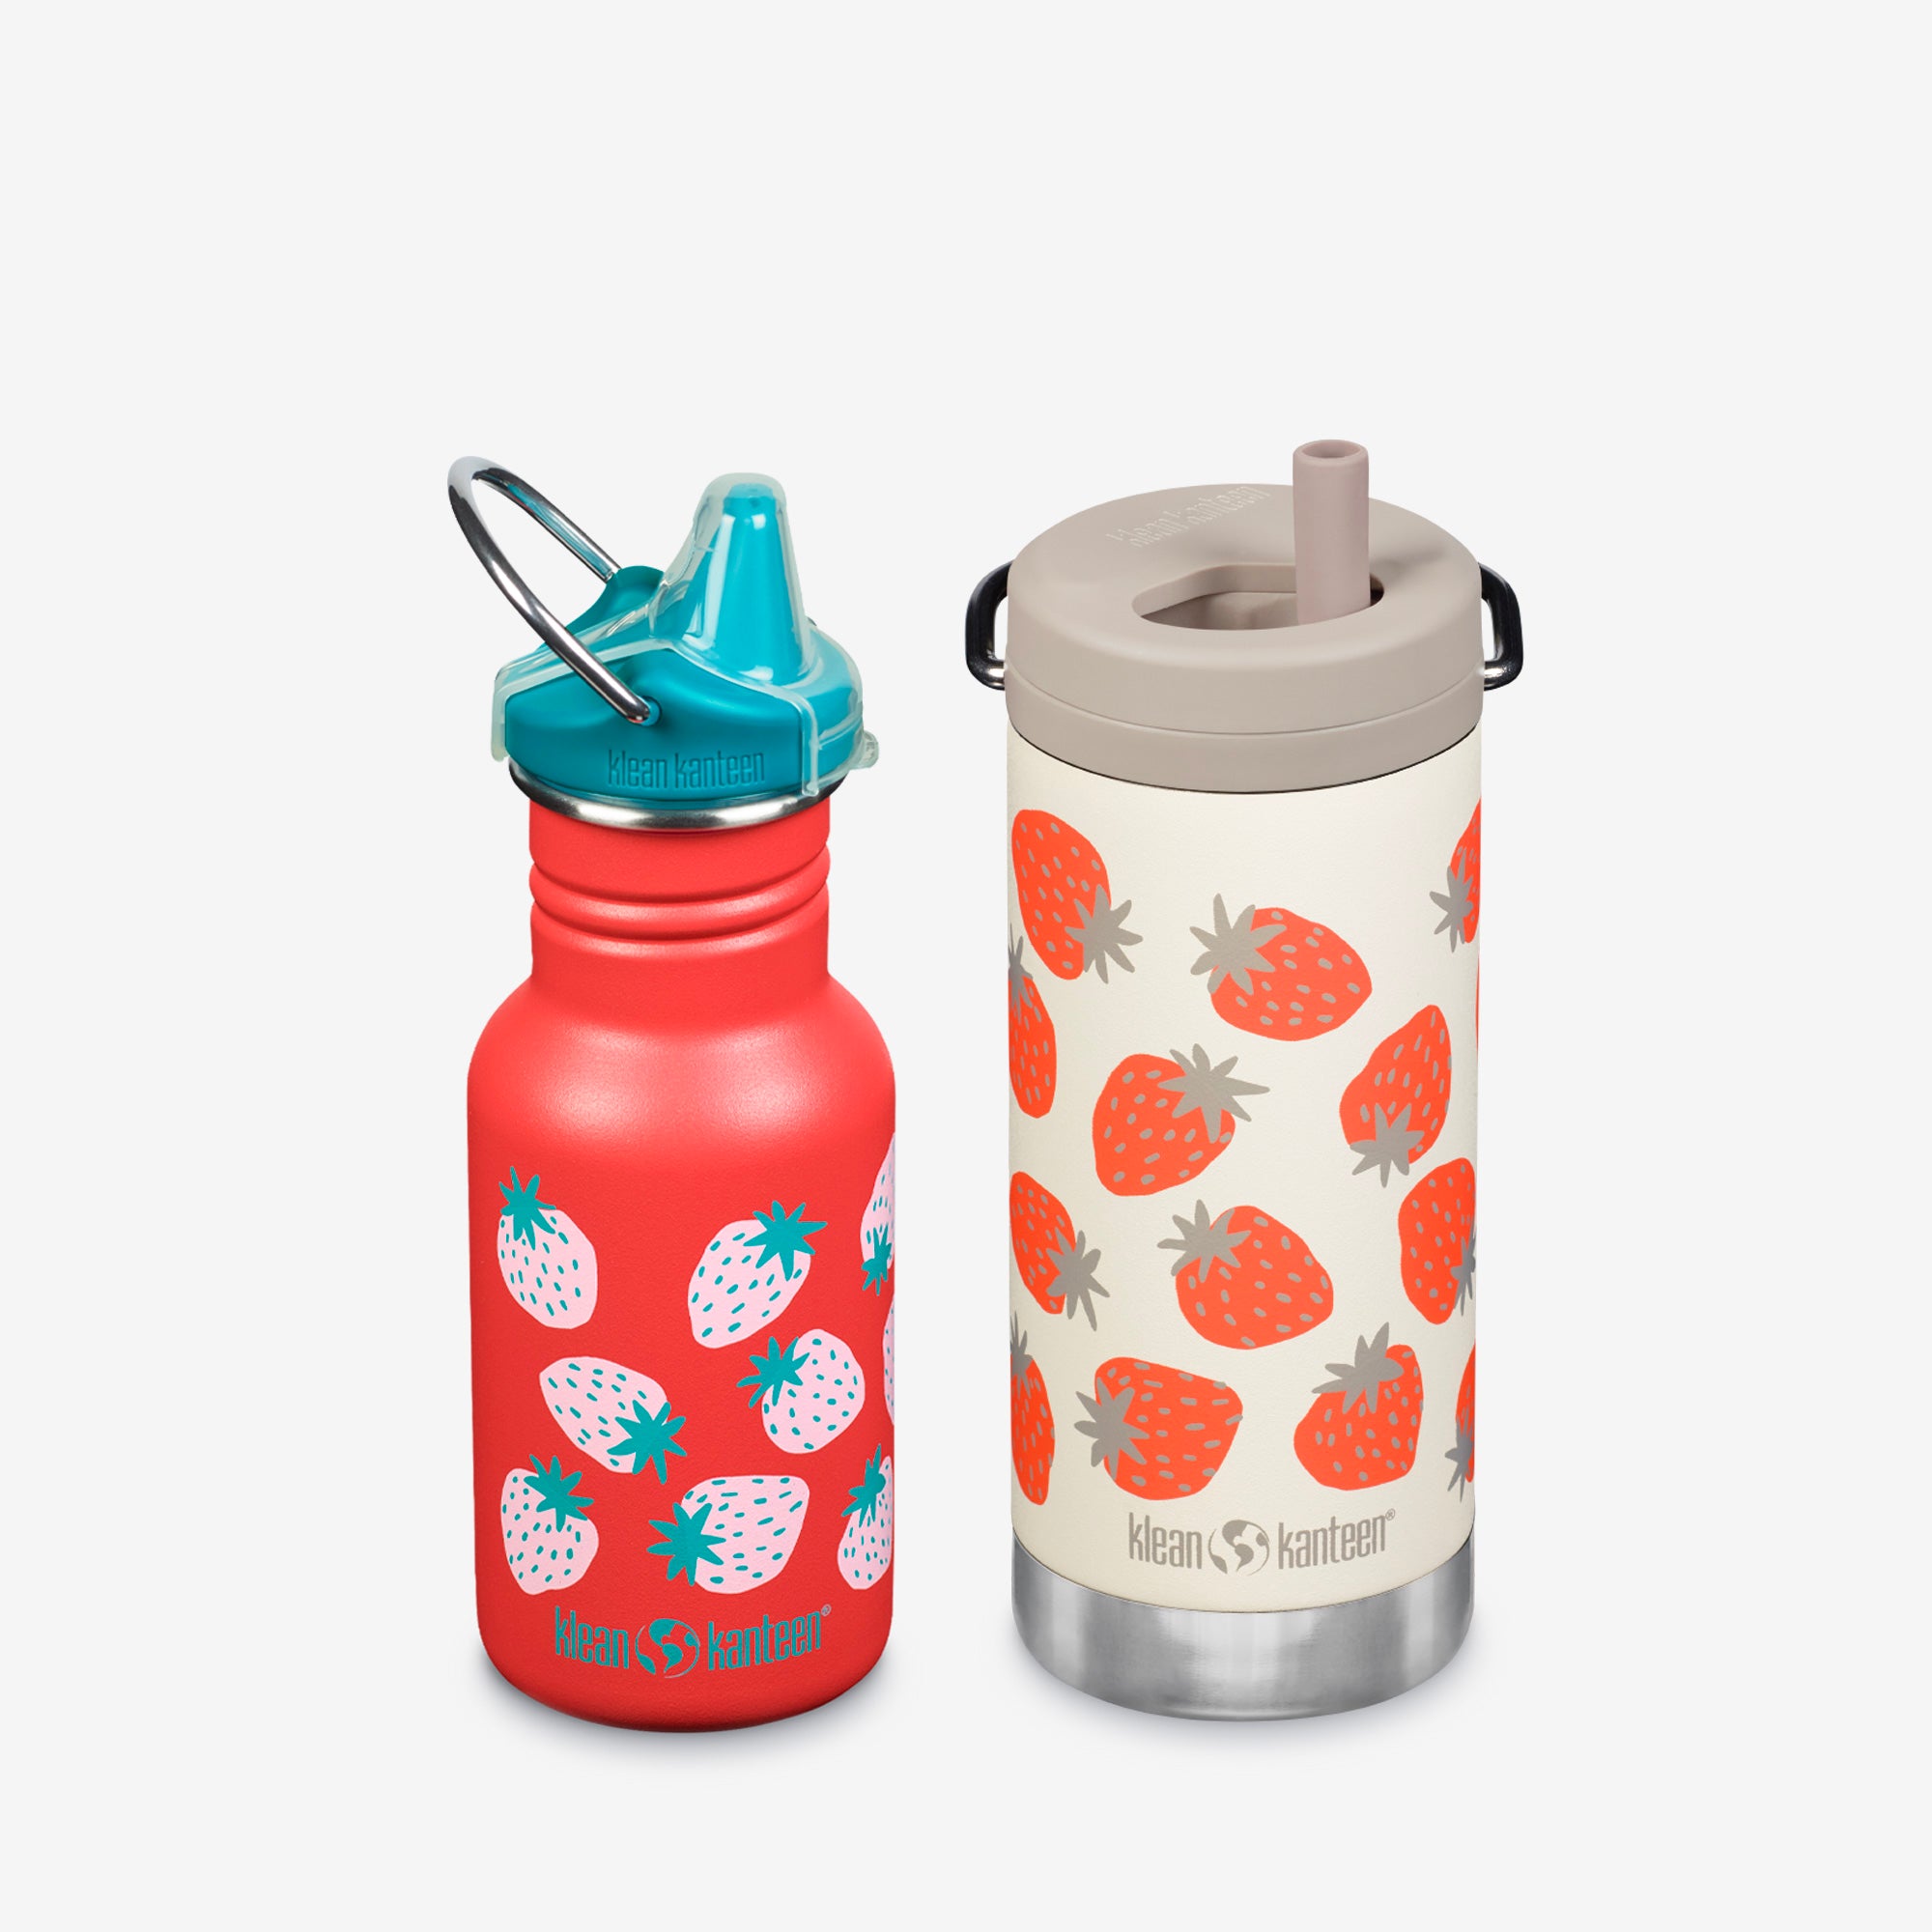 Best Stainless Steel Water Bottle For Toddlers